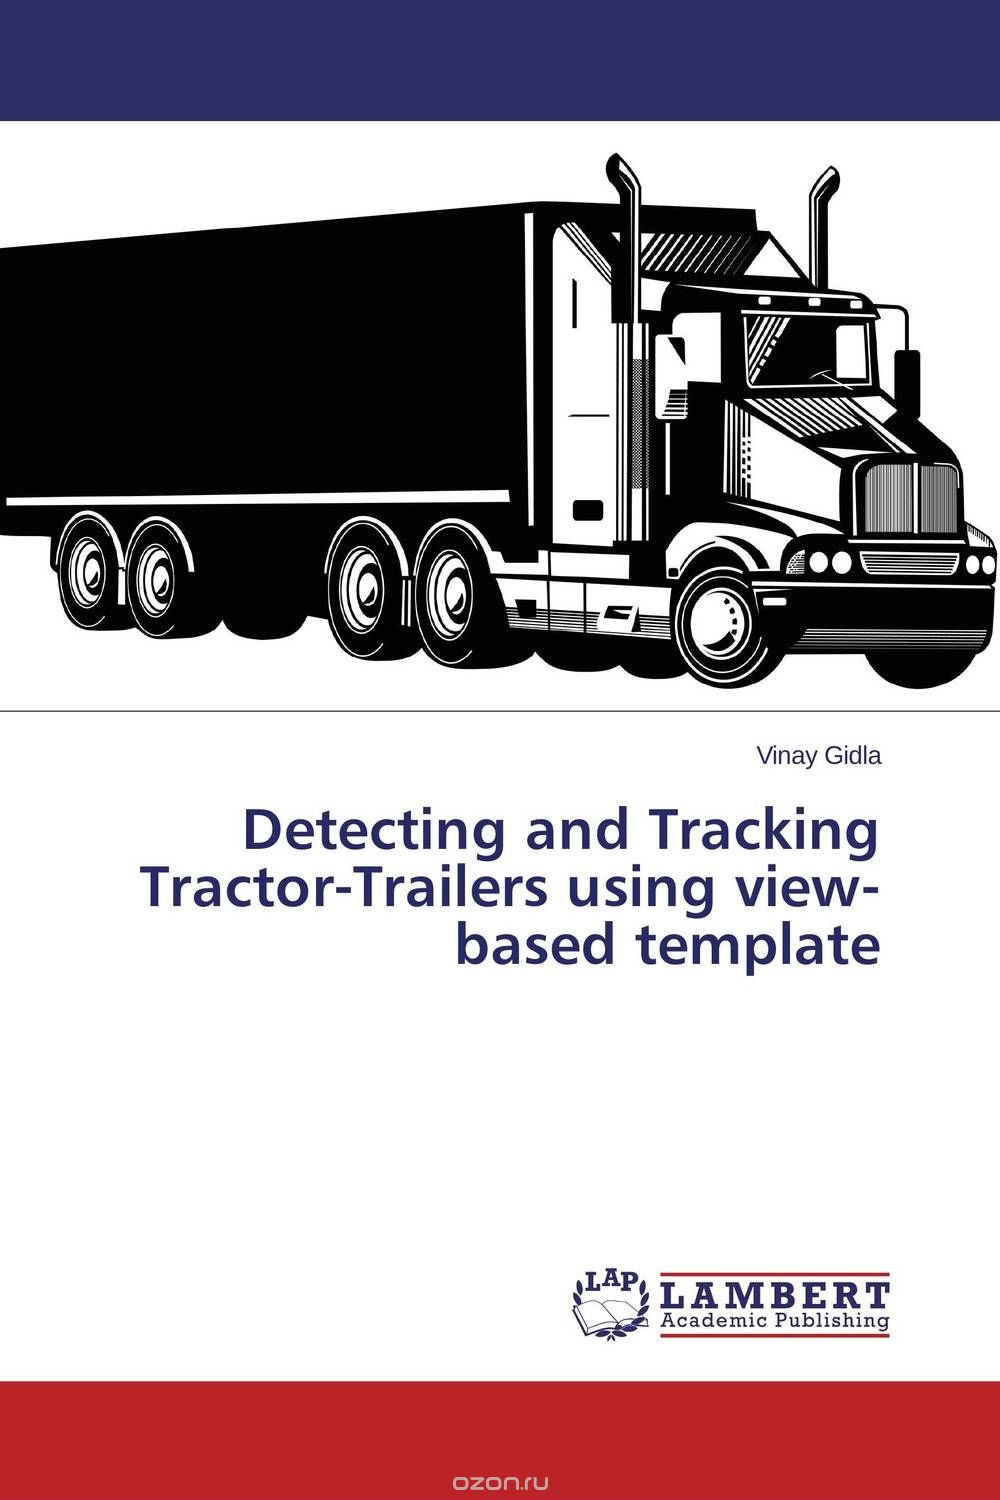 Detecting and Tracking Tractor-Trailers using view-based template